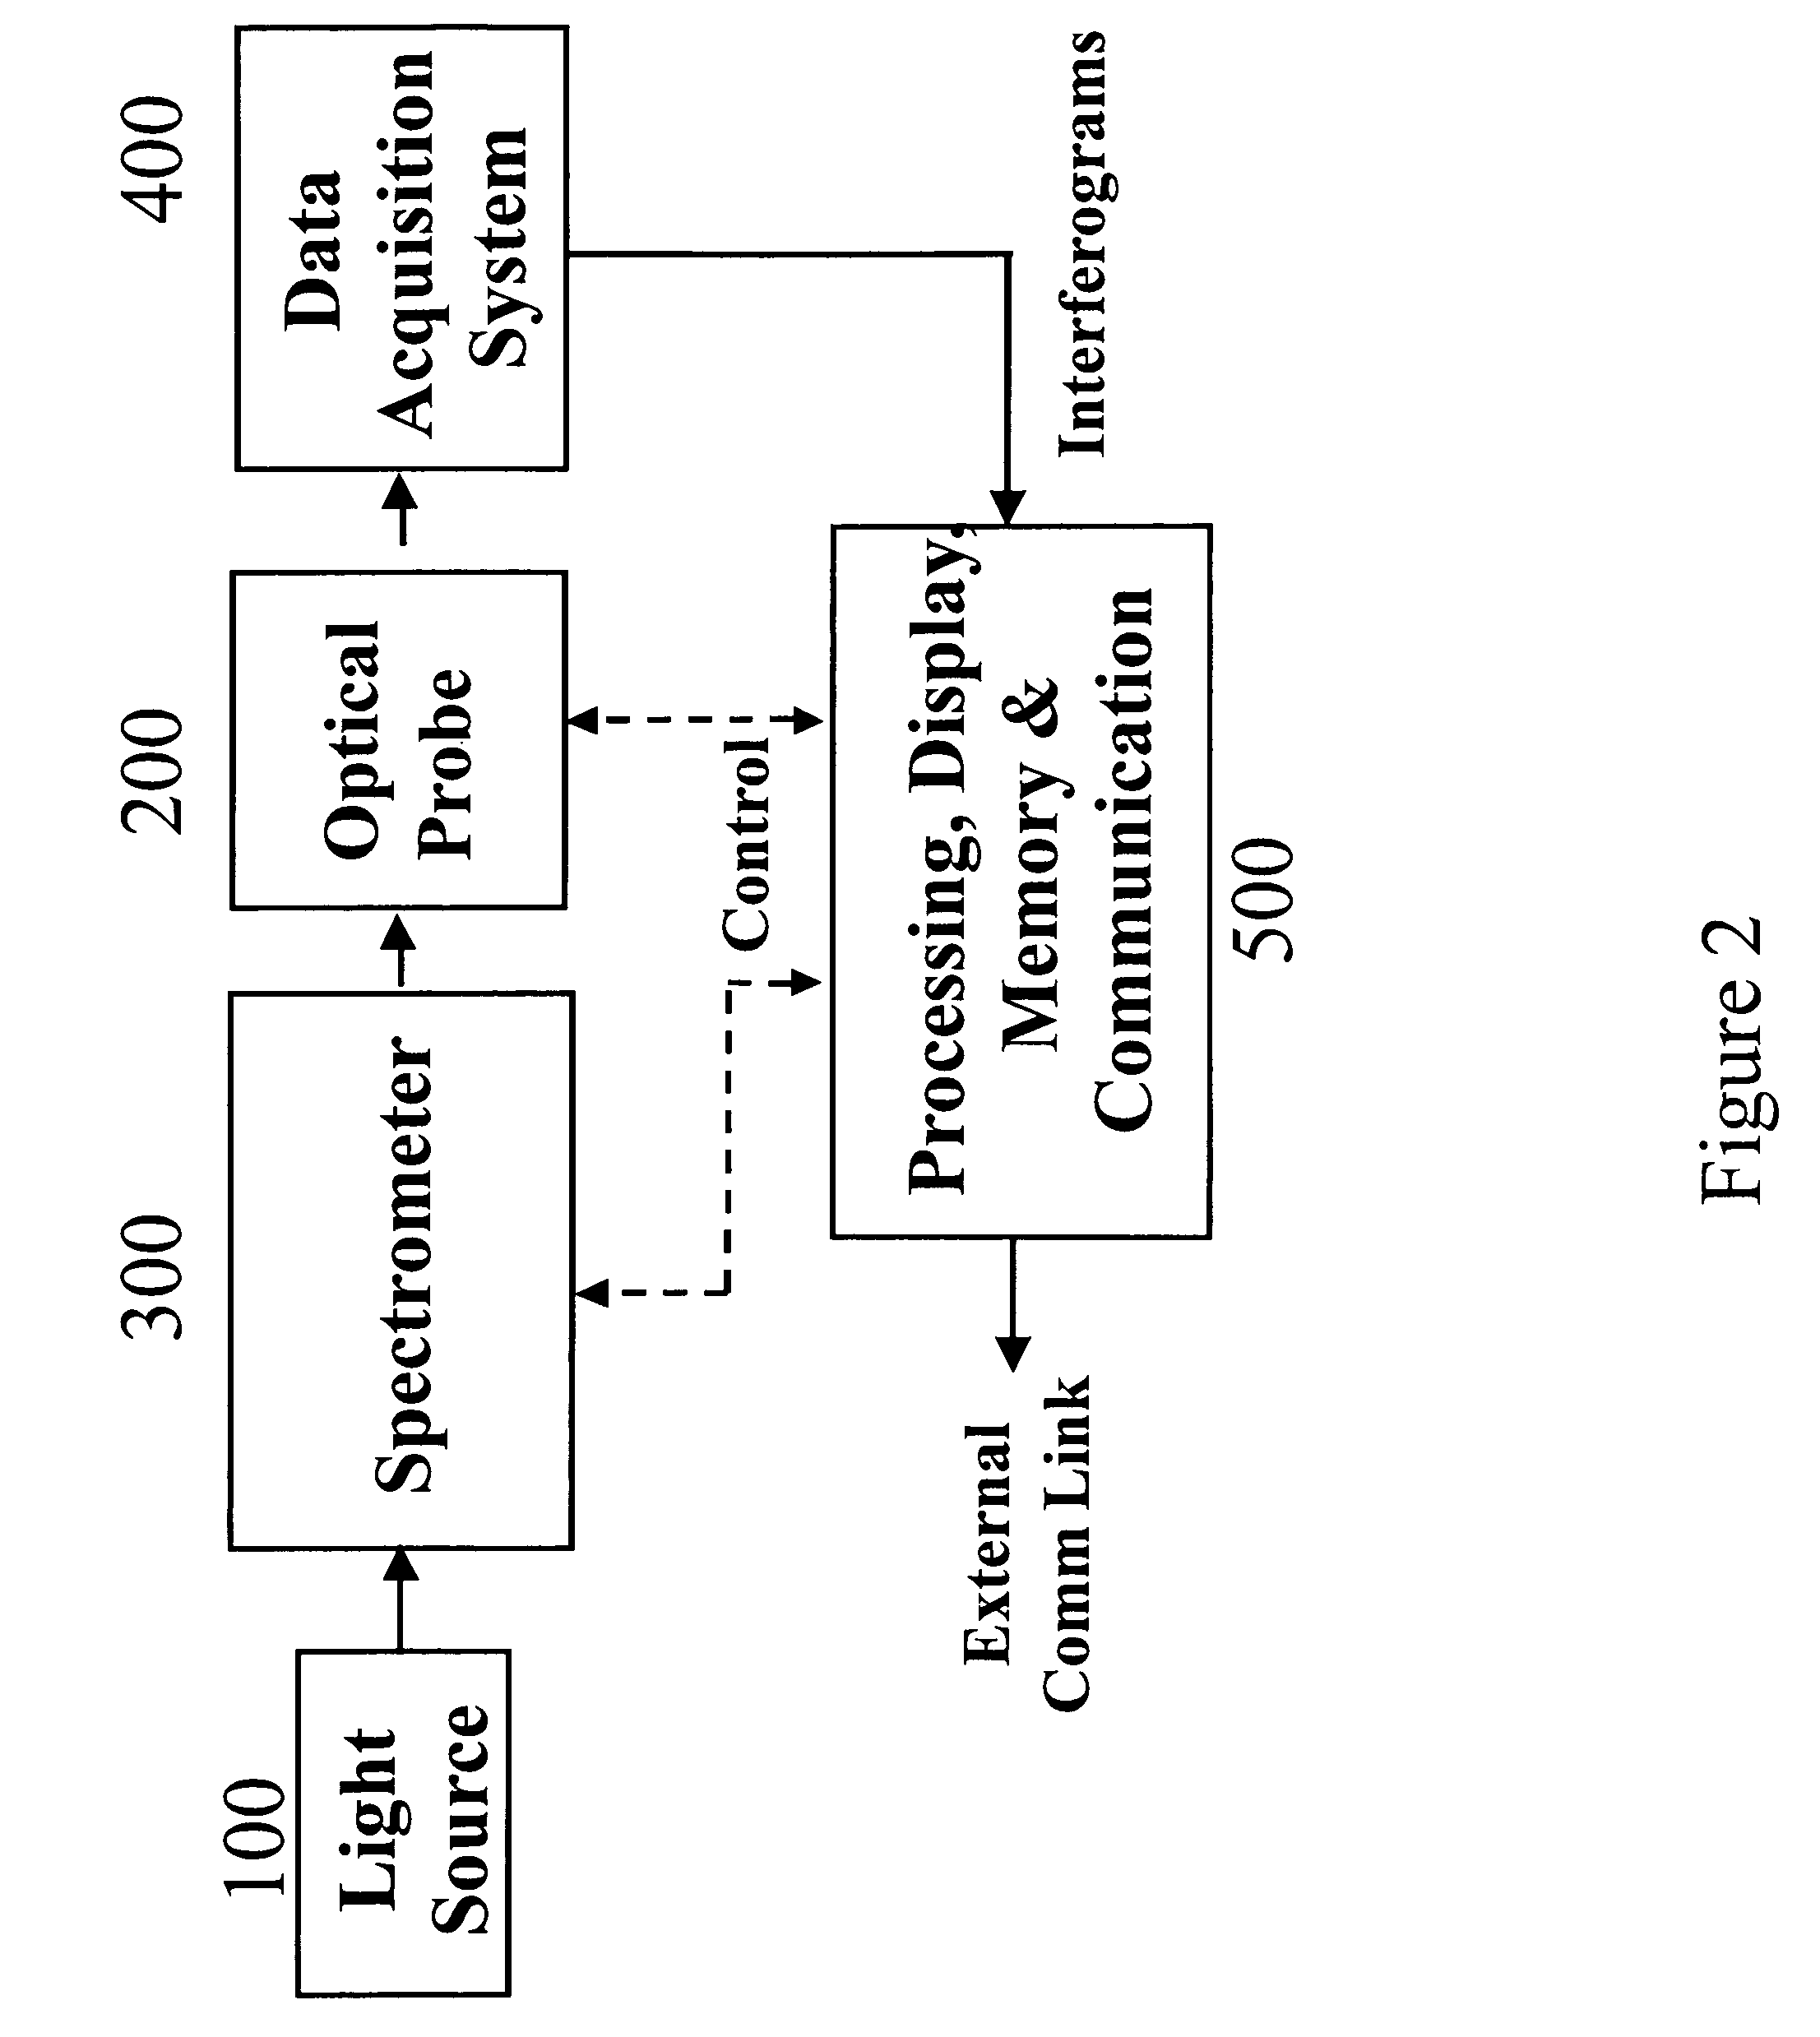 Method of making optical probes for non-invasive analyte measurements